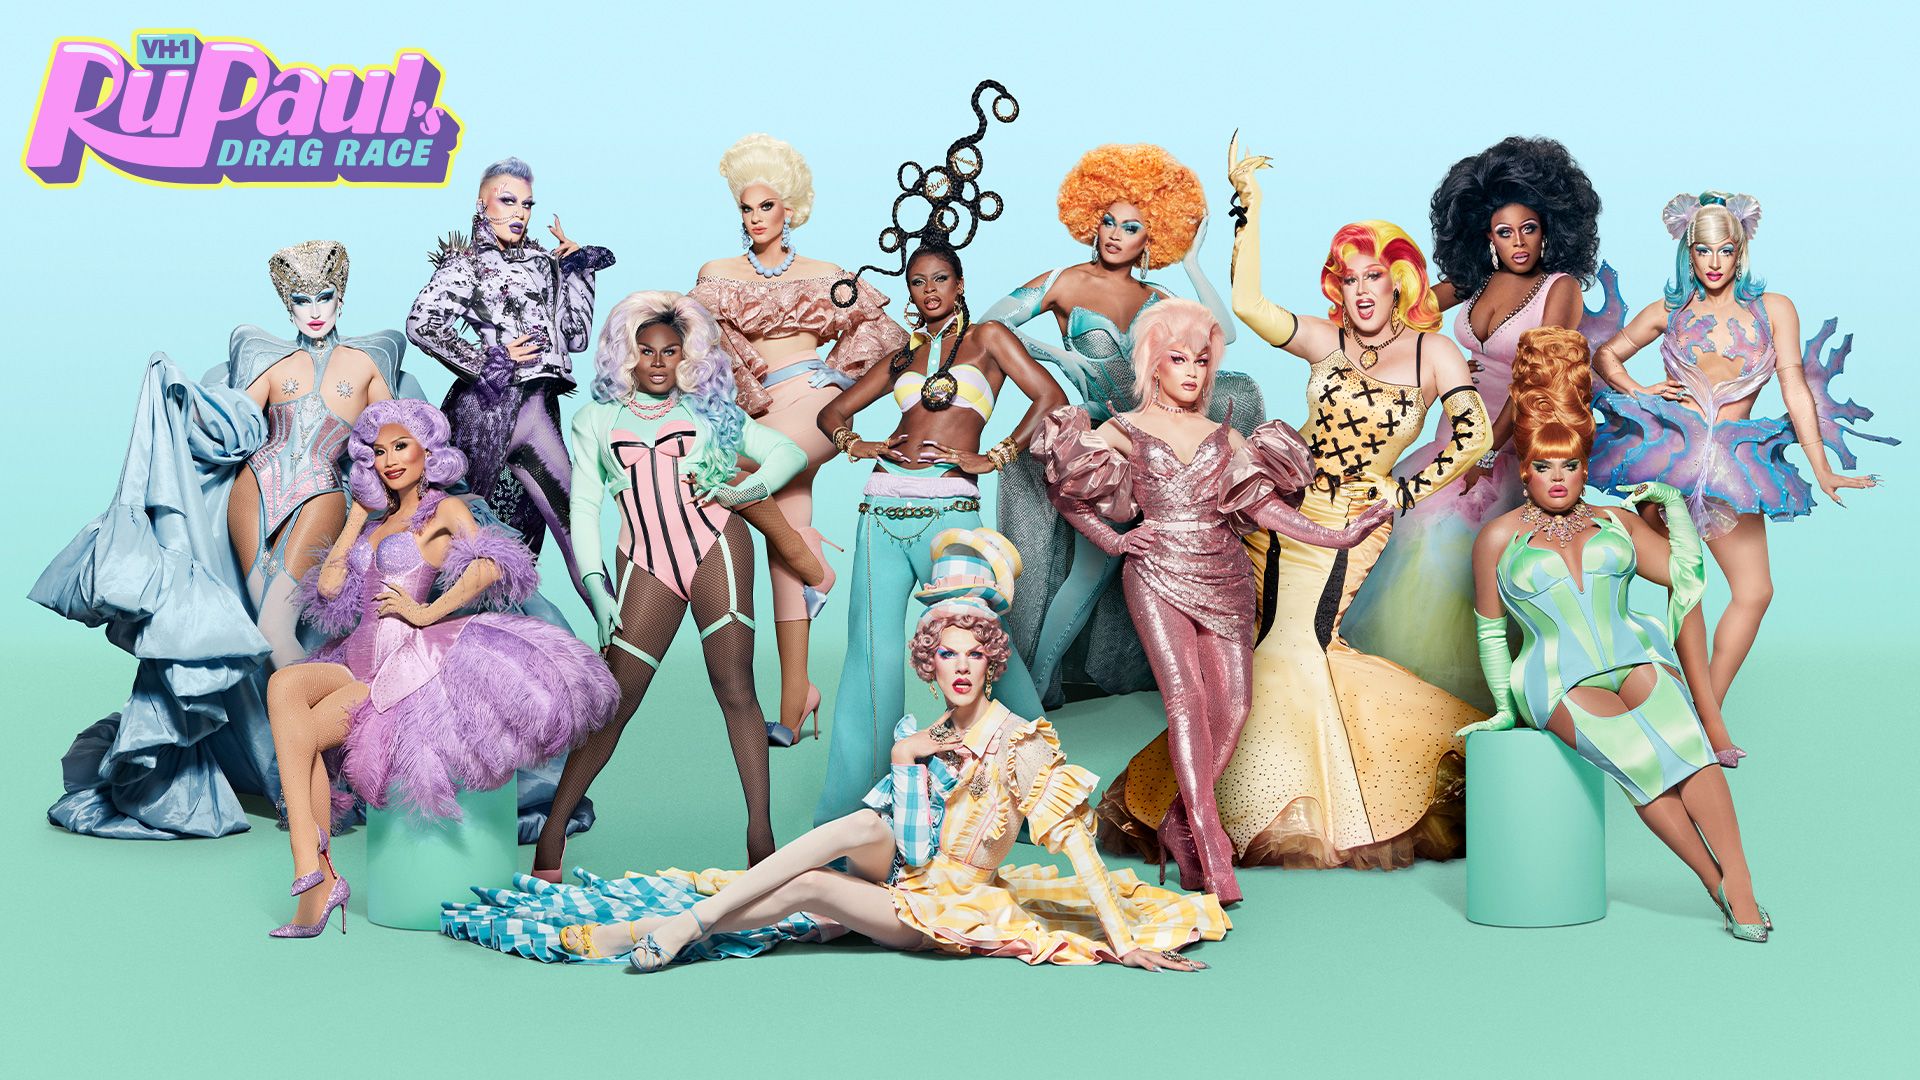 How to Stream RuPaul’s Drag Race on Netflix If You Can't Access It